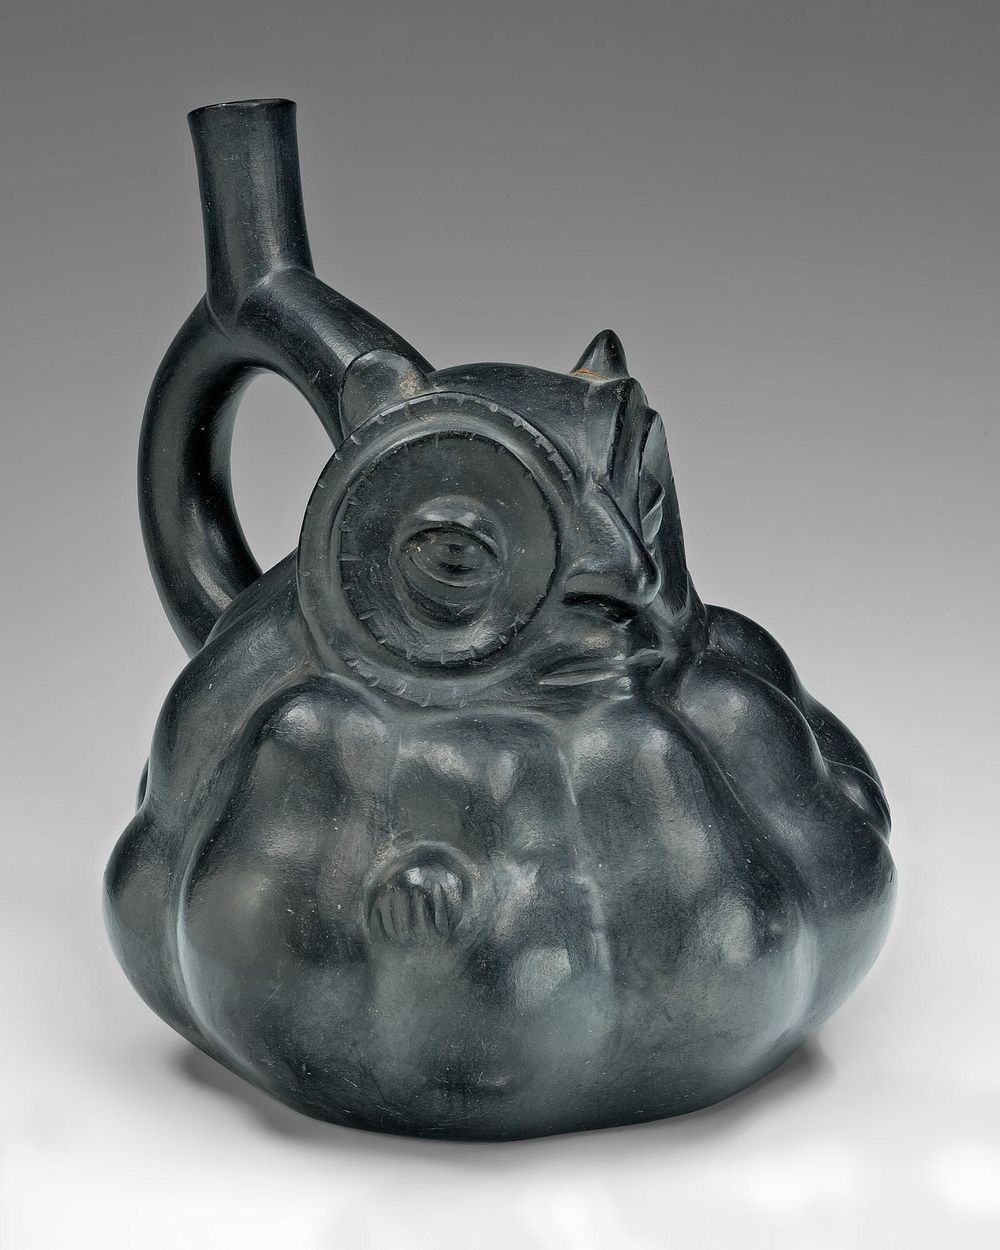 Handle Spout Vessel in the Form of an Owl with a Gourd-Like Body by Moche